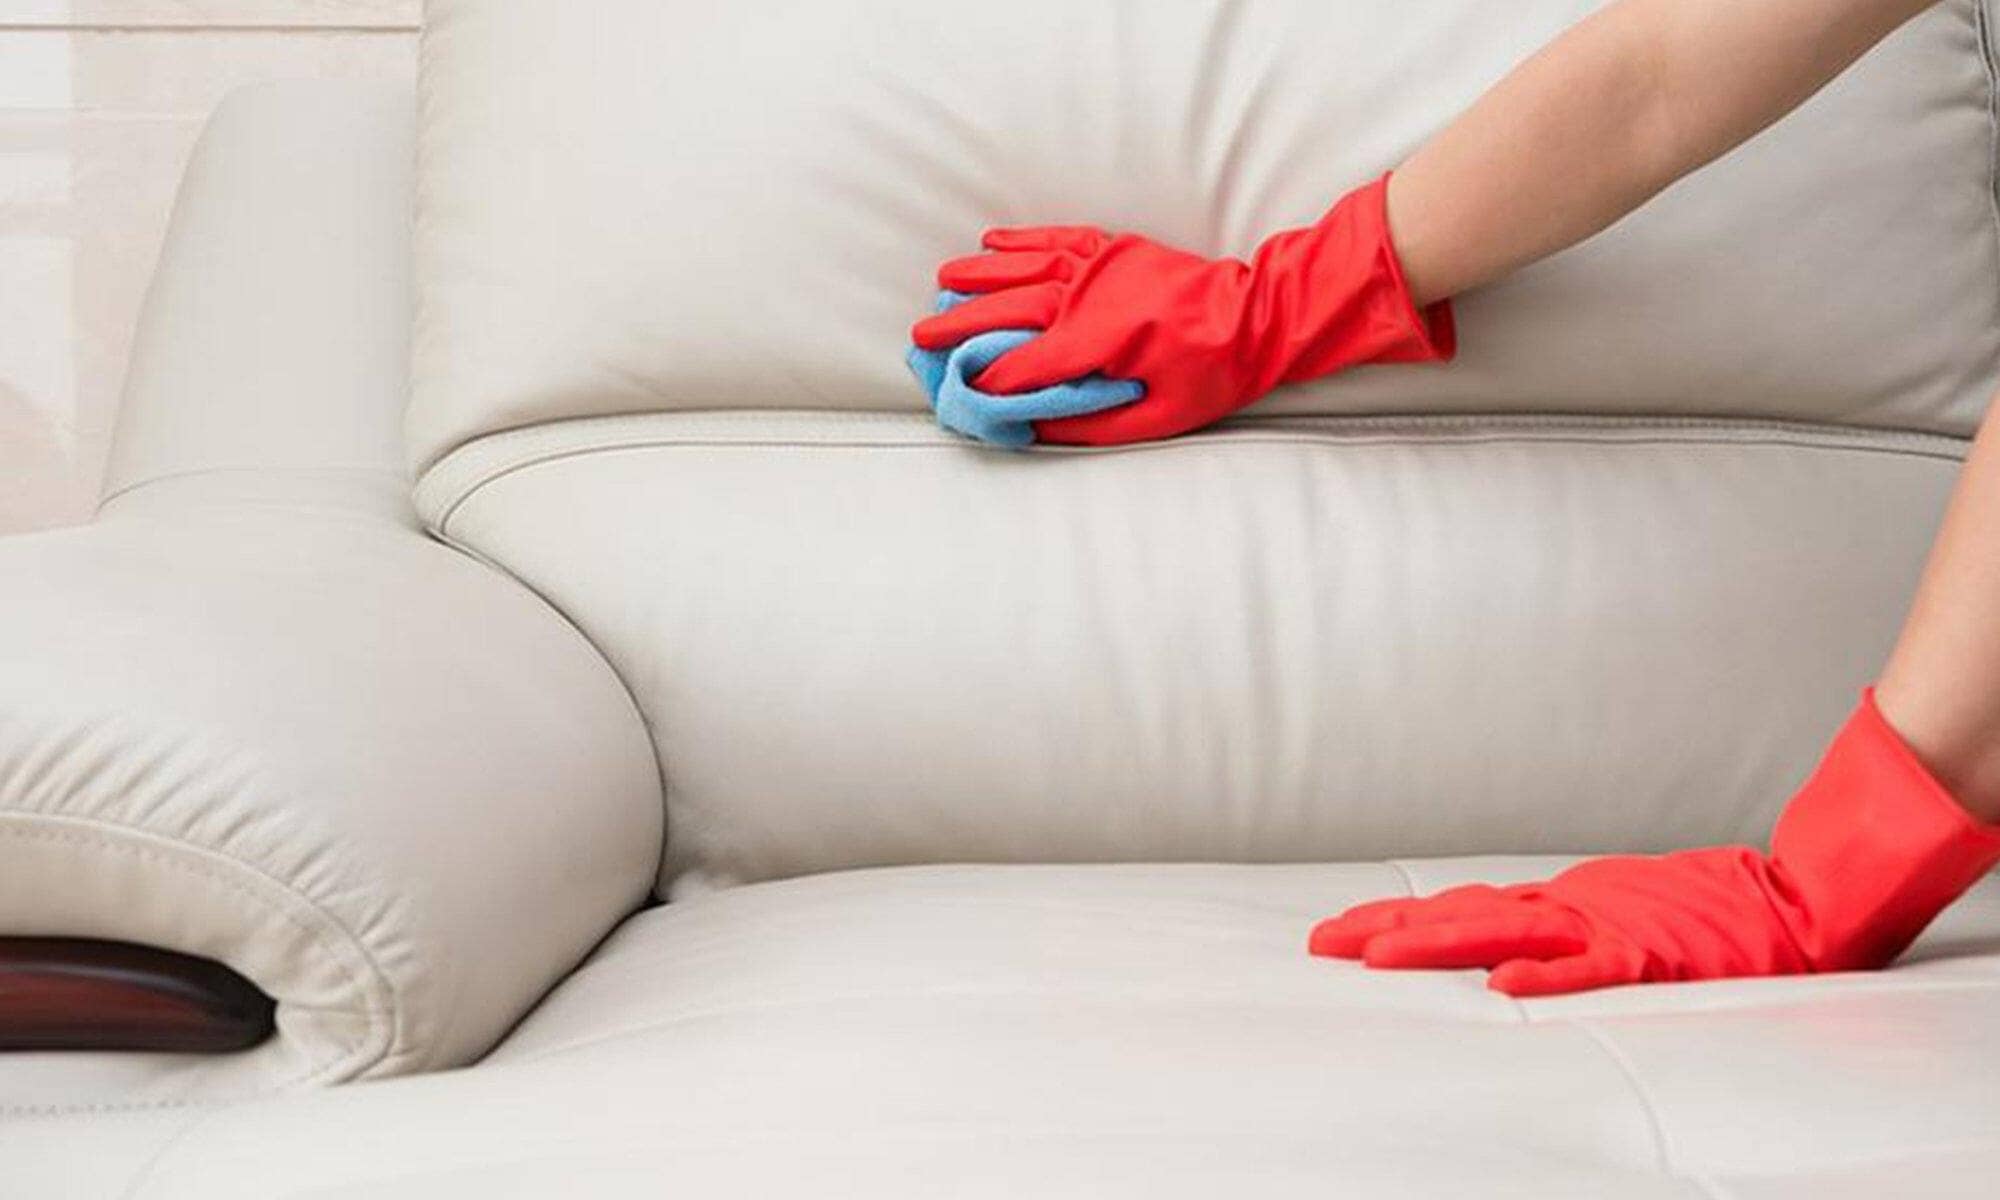 How to clean mould or mildew off a leather sofa